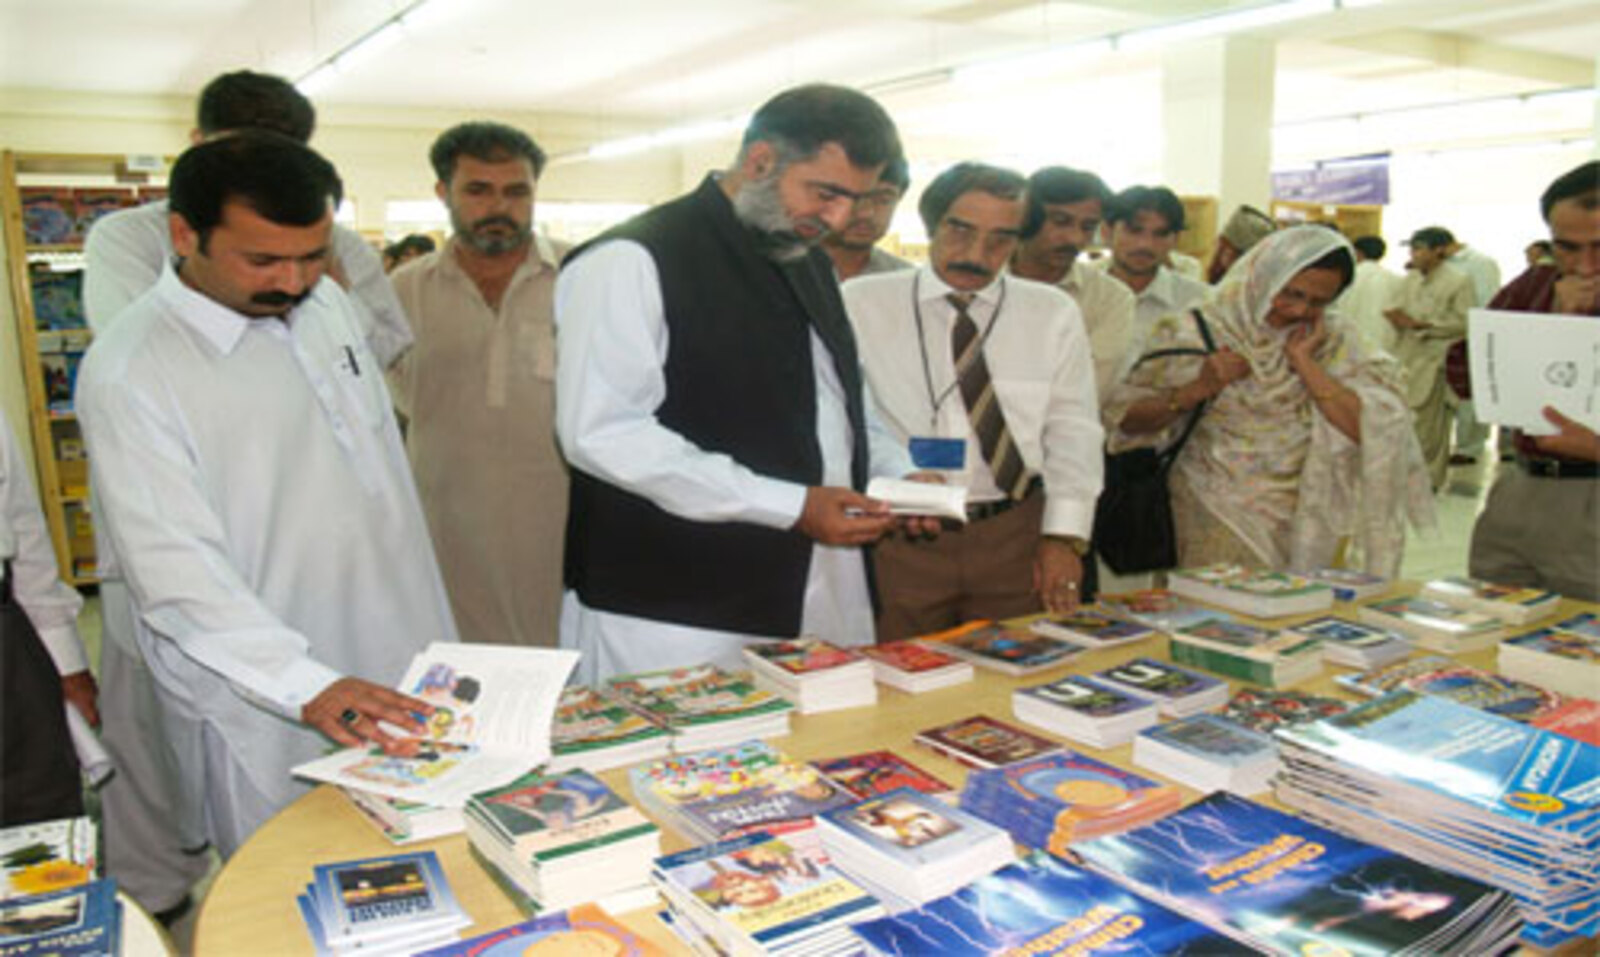 Representatives from different institutions select books at a Books for Asia Book Fair. 